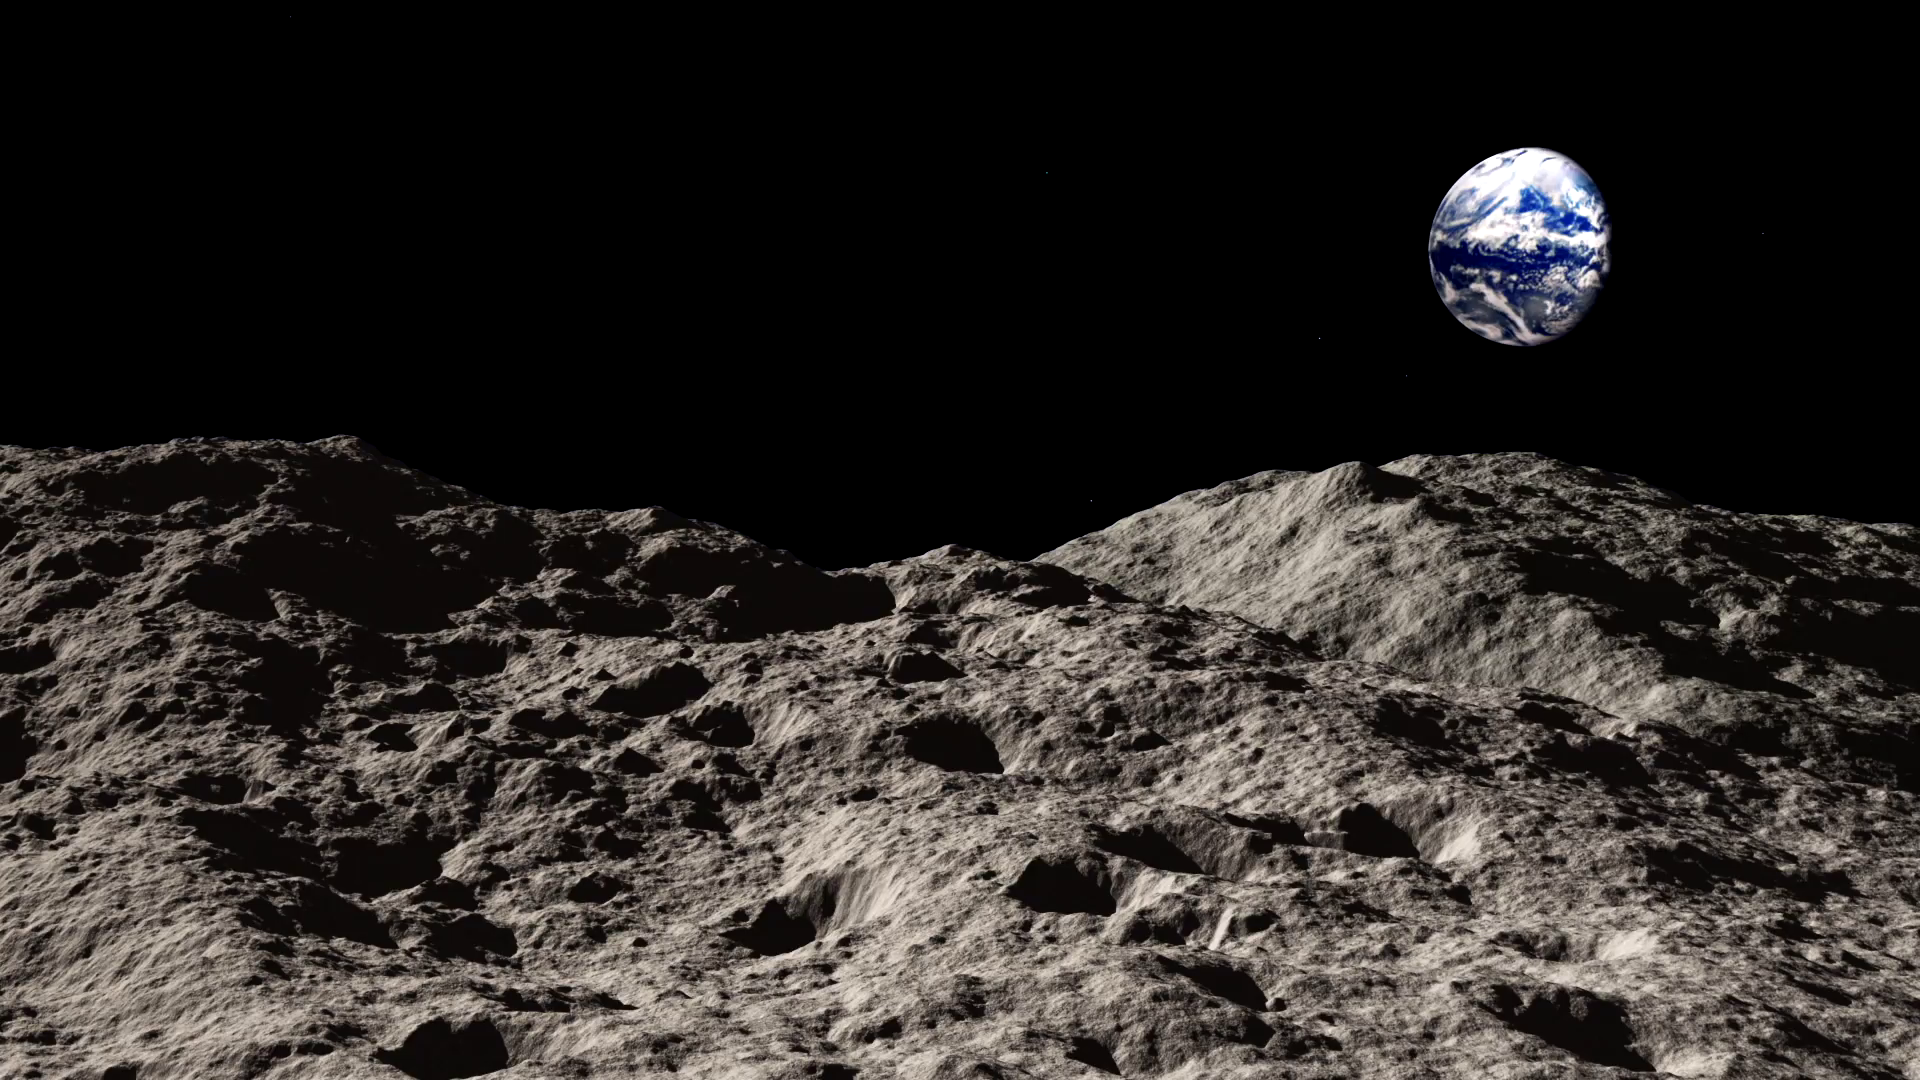 Moon landscape animation stock footage. Moons surface with the ...